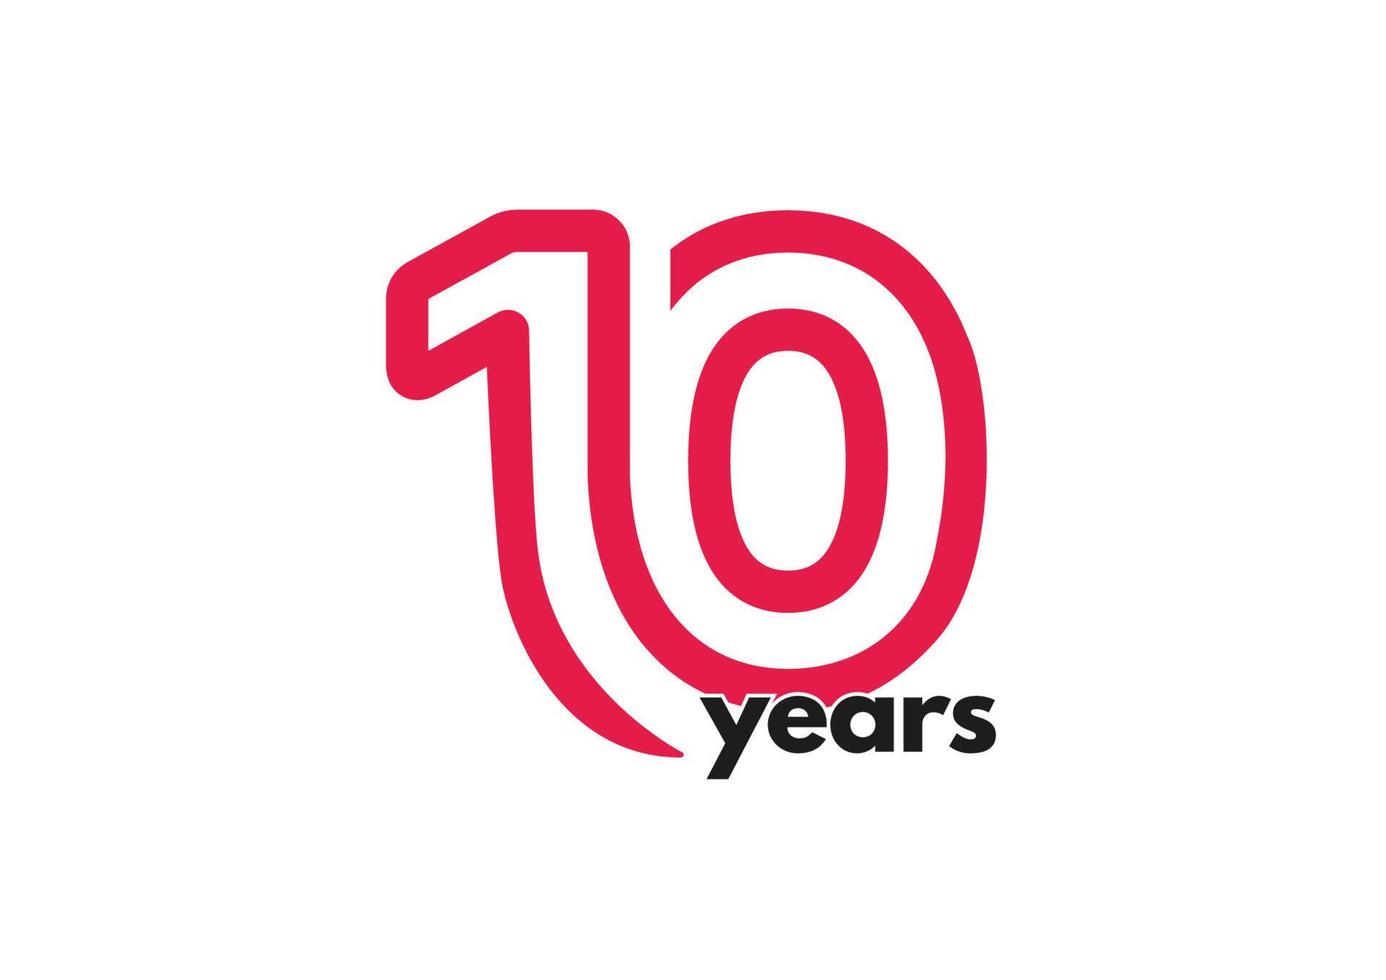 10th year logo and typography vector